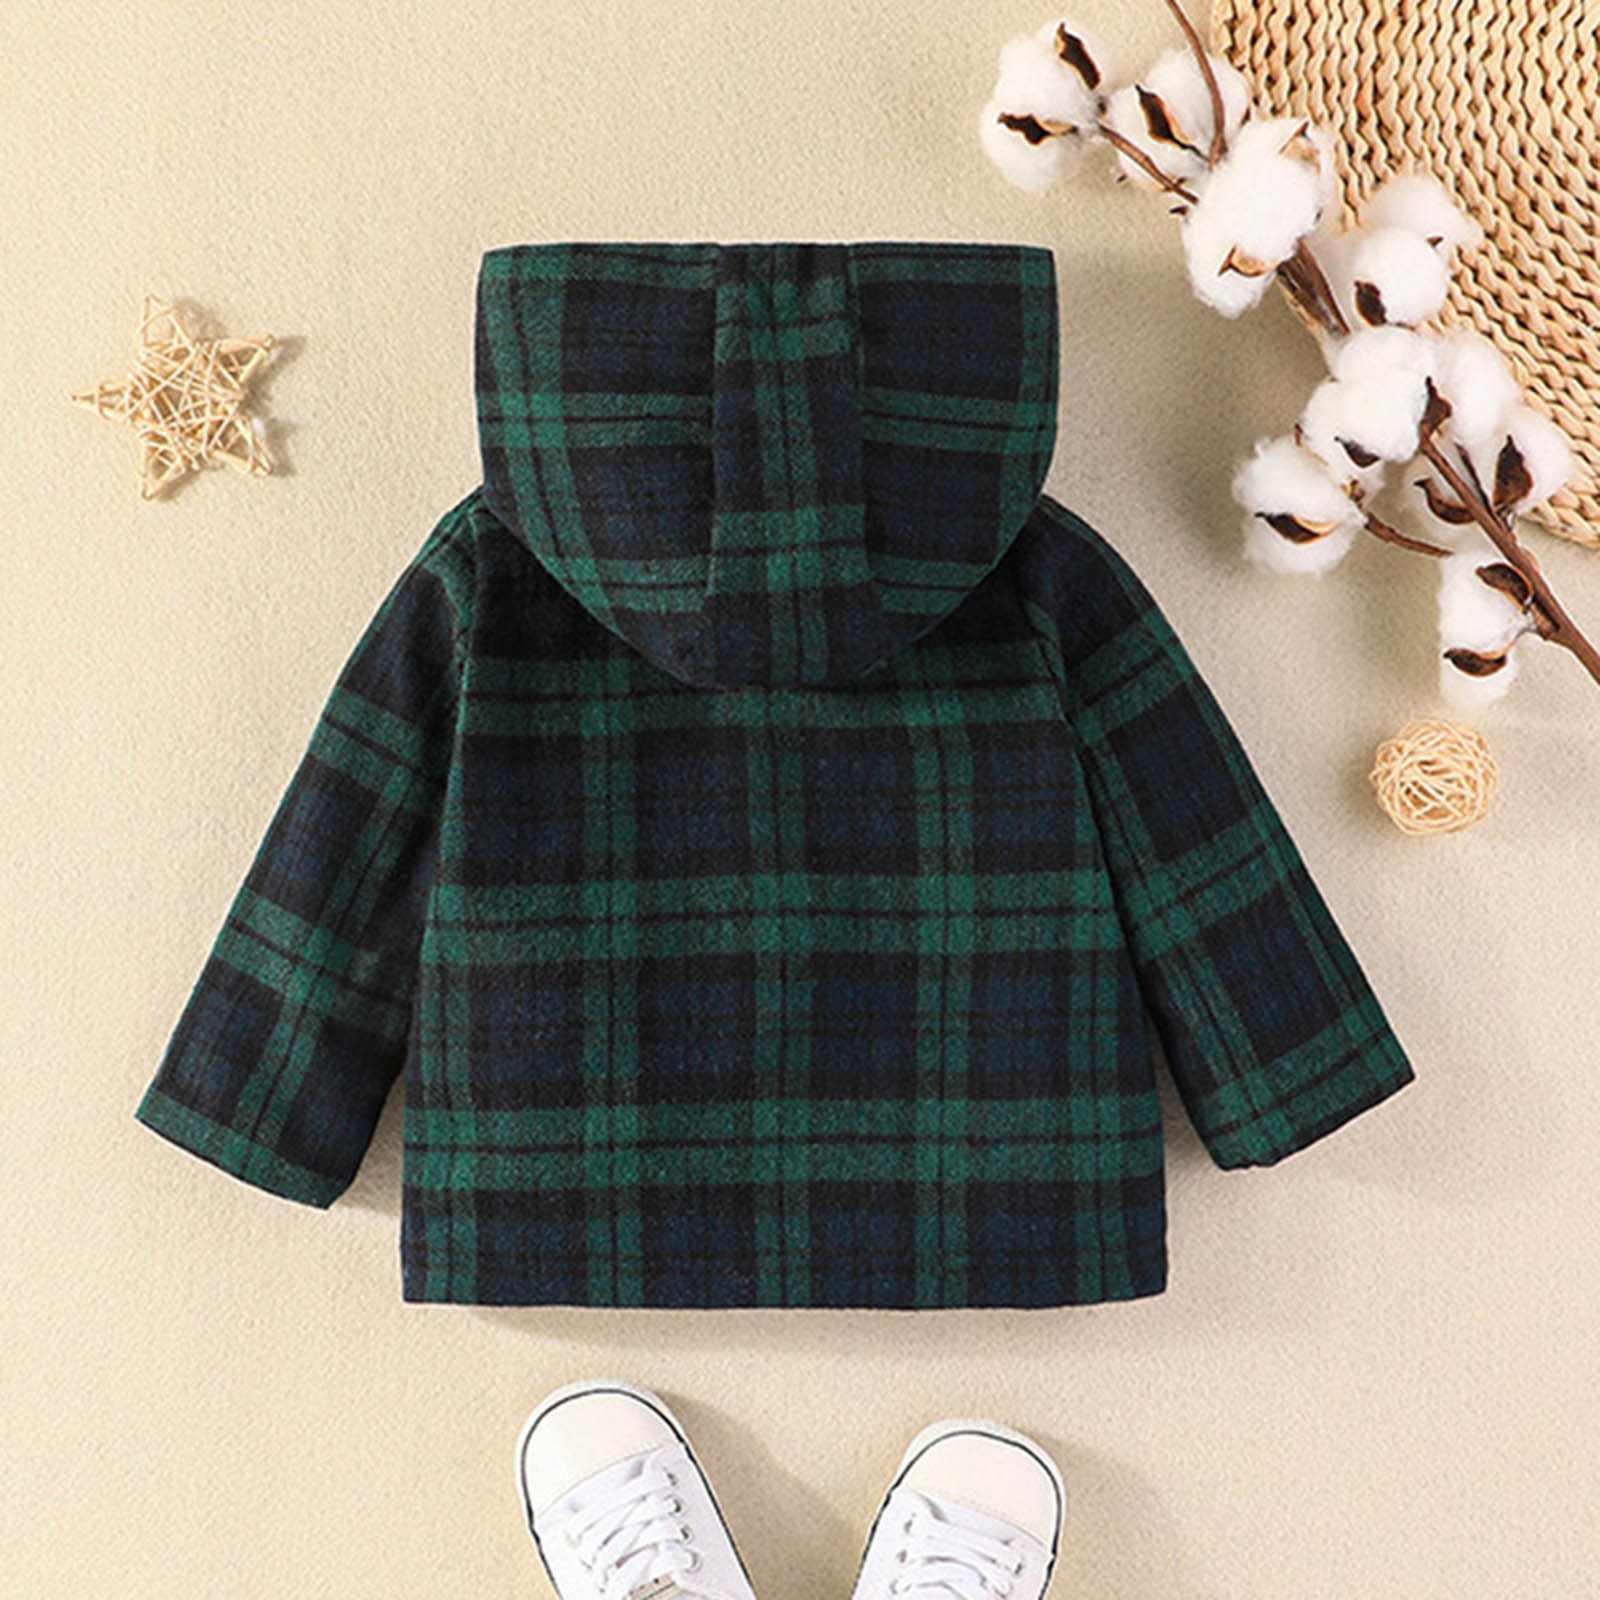 Toddler Fleece Lined Warm Shirt Jacket Autumn Winter Thick Fashion Plaid Long Sleeve Button Belt Hooded Jacket Girls' Casual Hoodie Wool Trench Coat - image 5 of 8